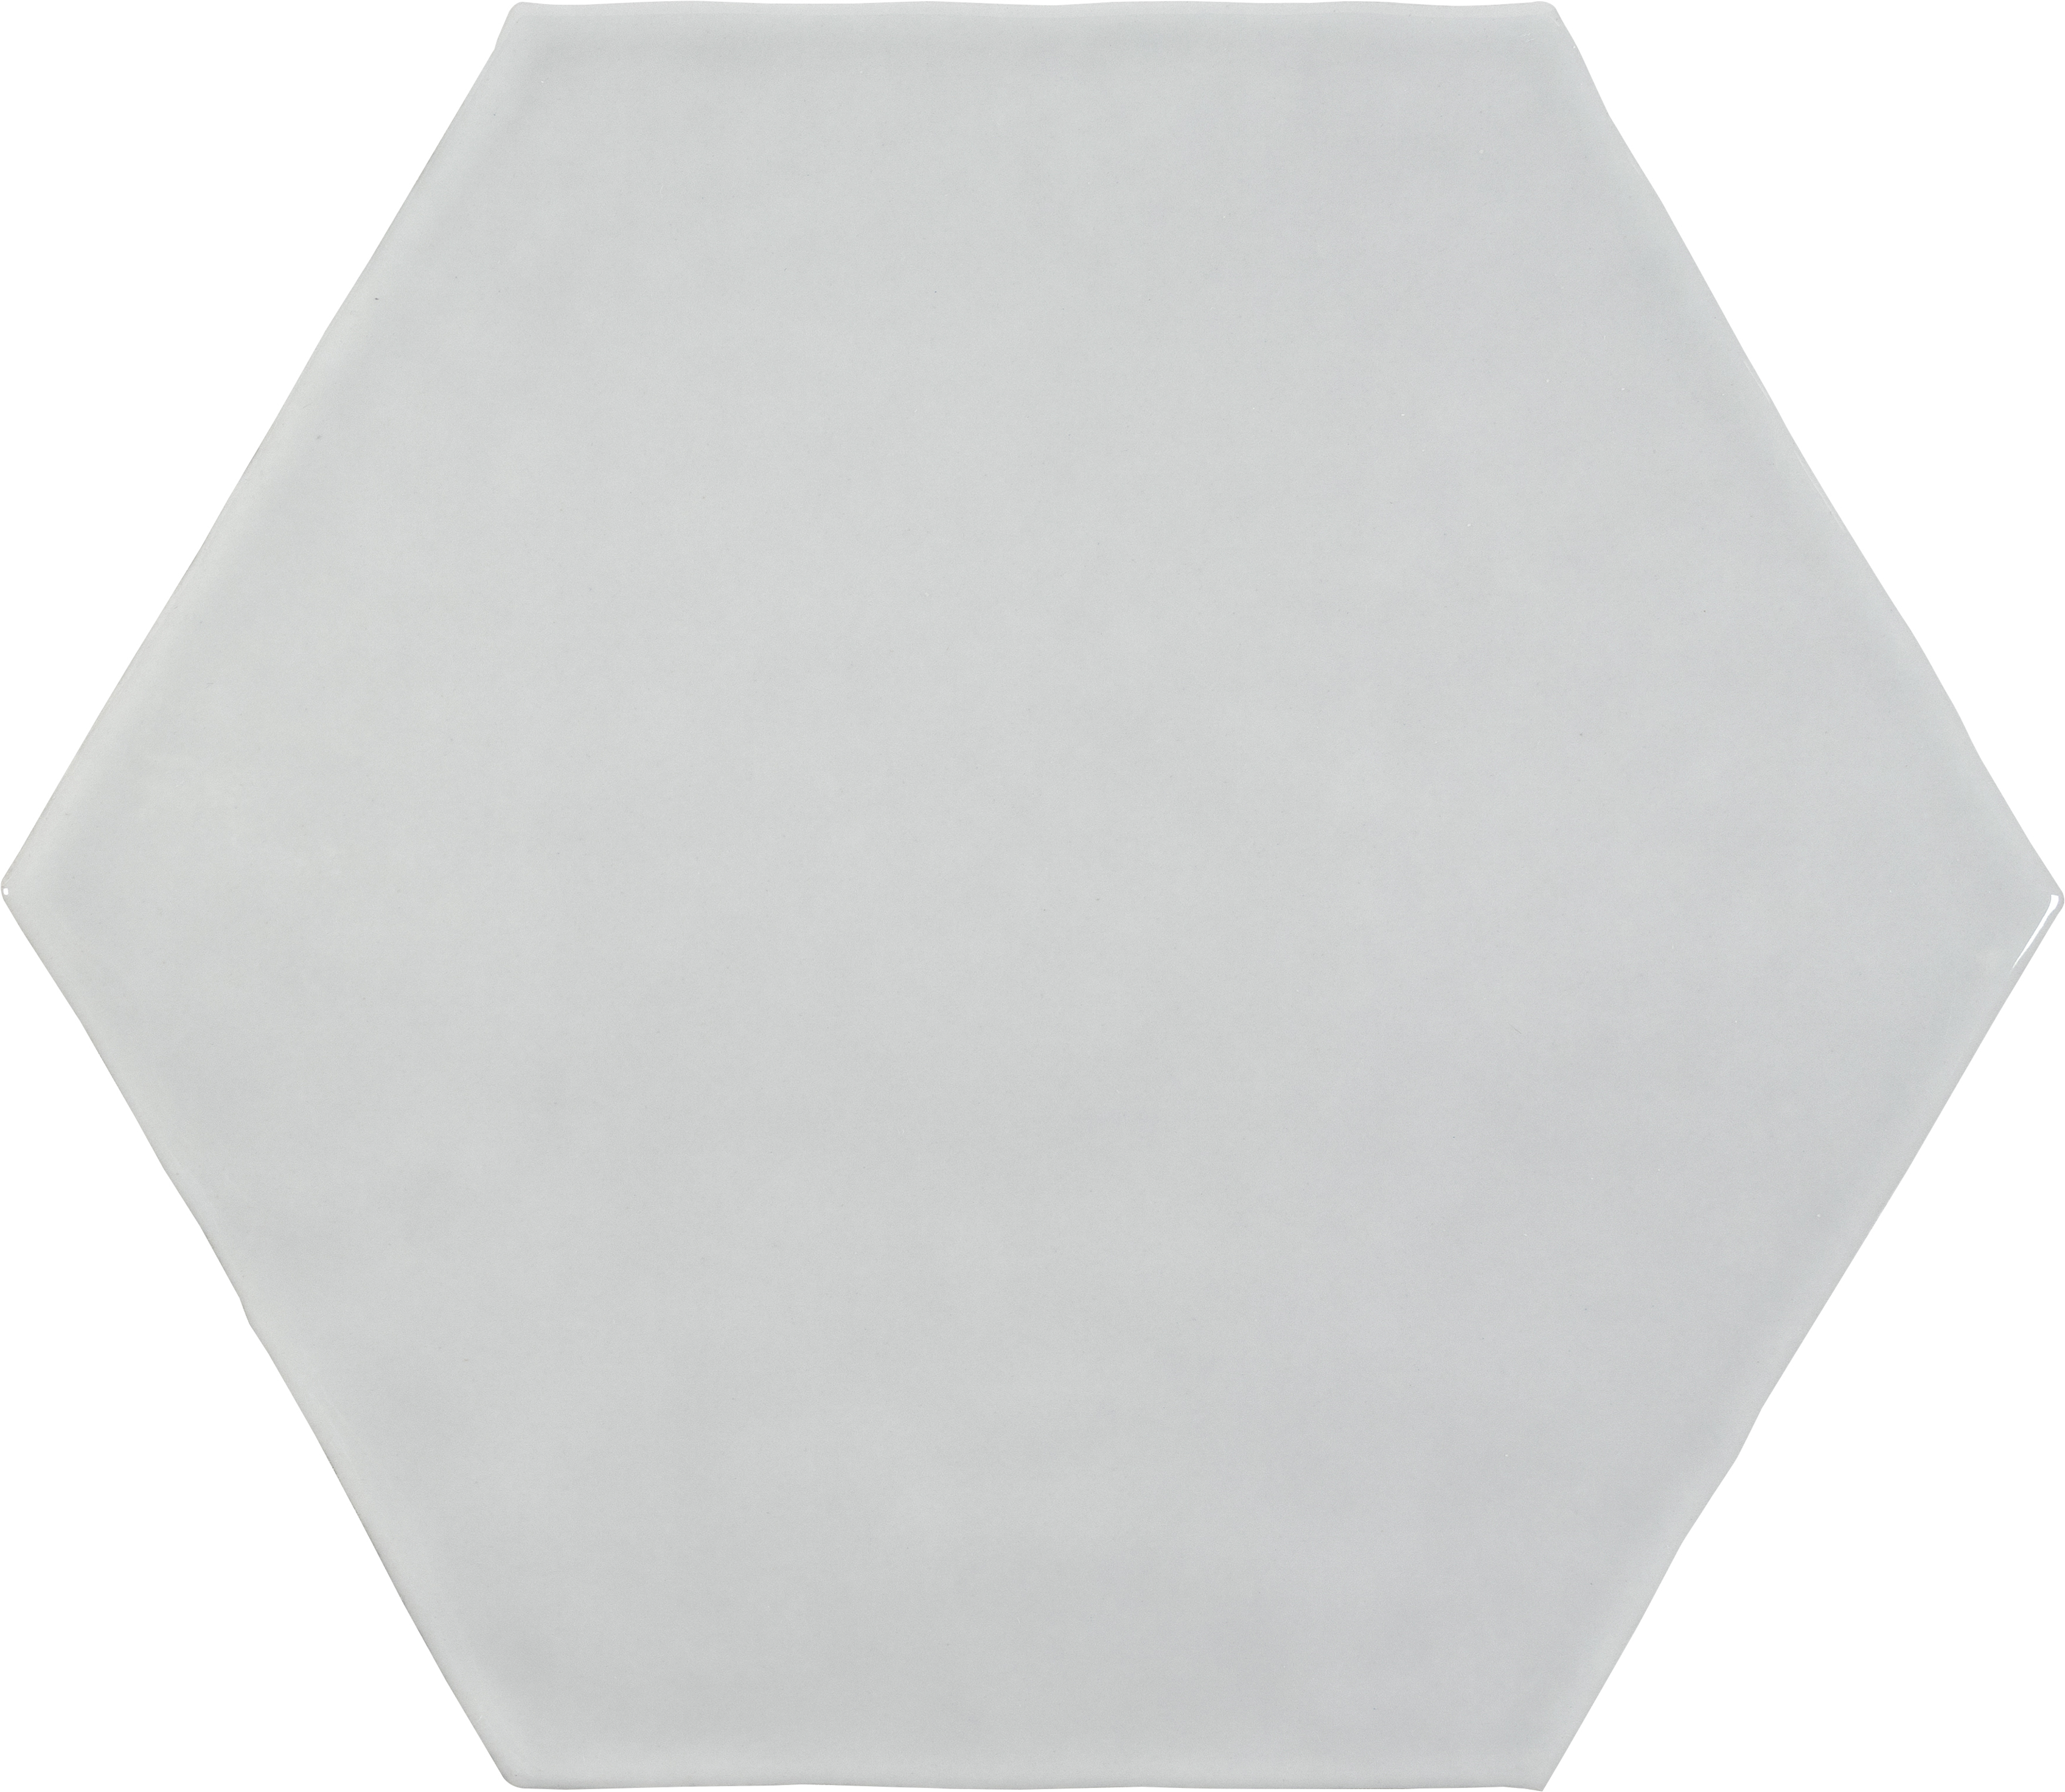 silver pattern glazed ceramic field tile from teramoda anatolia collection distributed by surface group international glossy finish pressed edge 6-inch hexagon shape